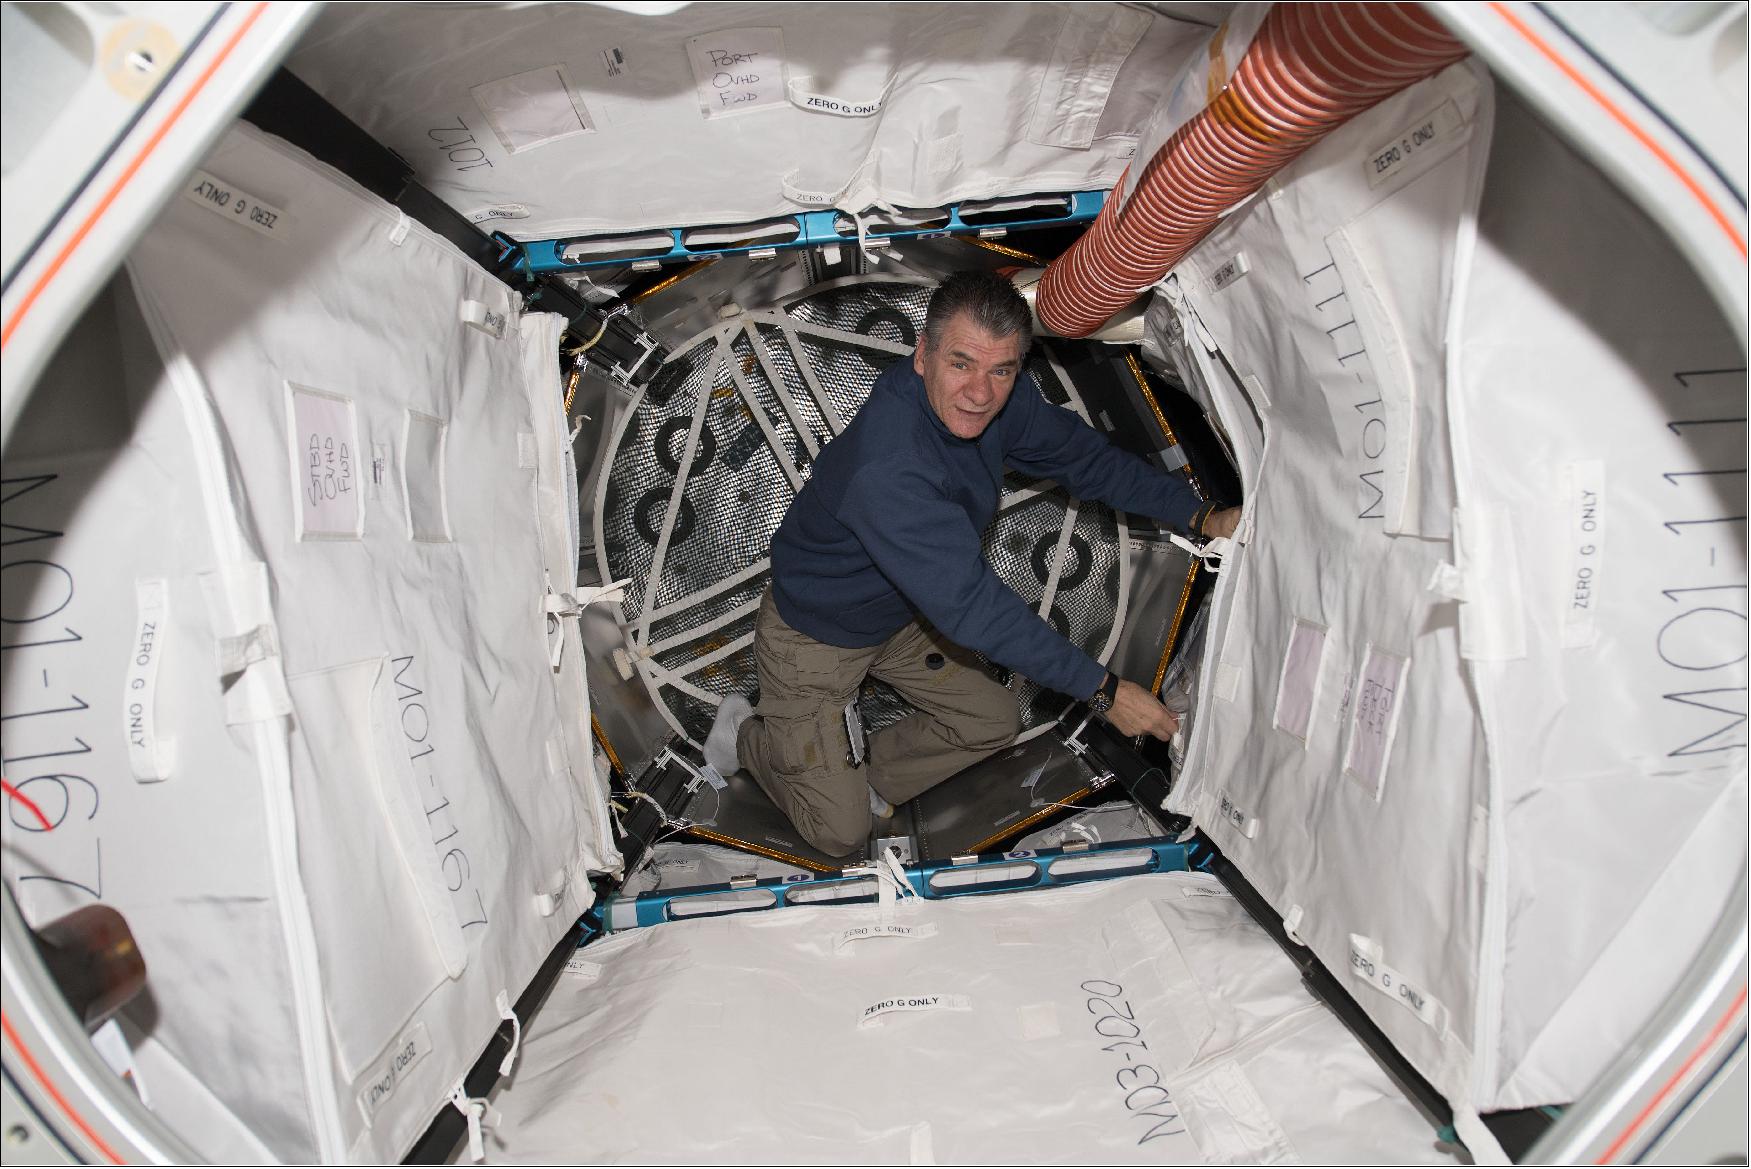 Figure 6: ESA astronaut Paolo Nespoli works inside the BEAM (Bigelow Expandable Activity Module) outfitting it for future cargo storage aboard the International Space Station (image credit: NASA, ESA)